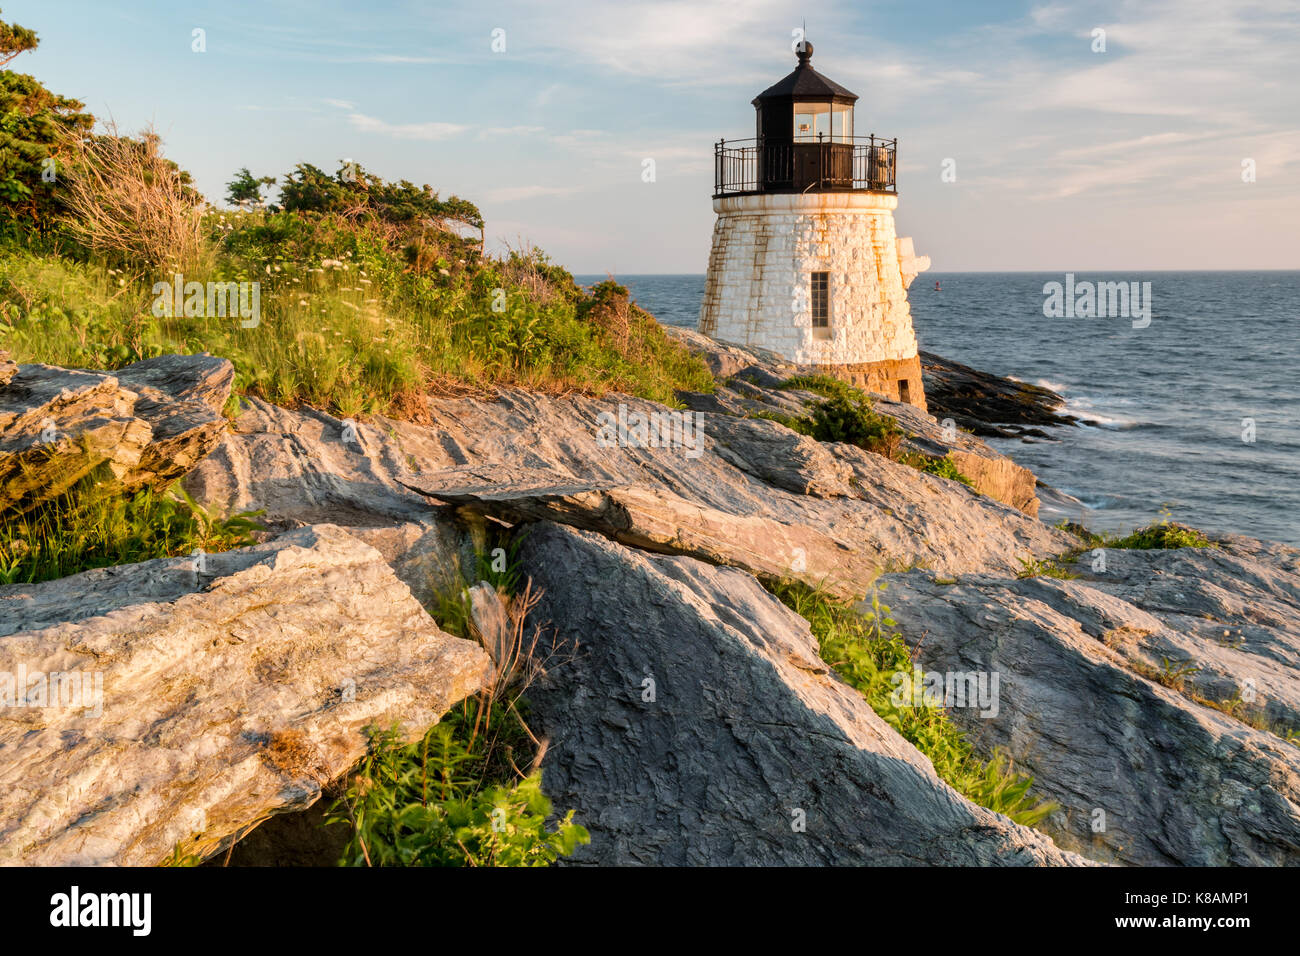 Castle Hill Lighthouse bathed with the warm glow of sunset, Newport, Rhode Island Stock Photo